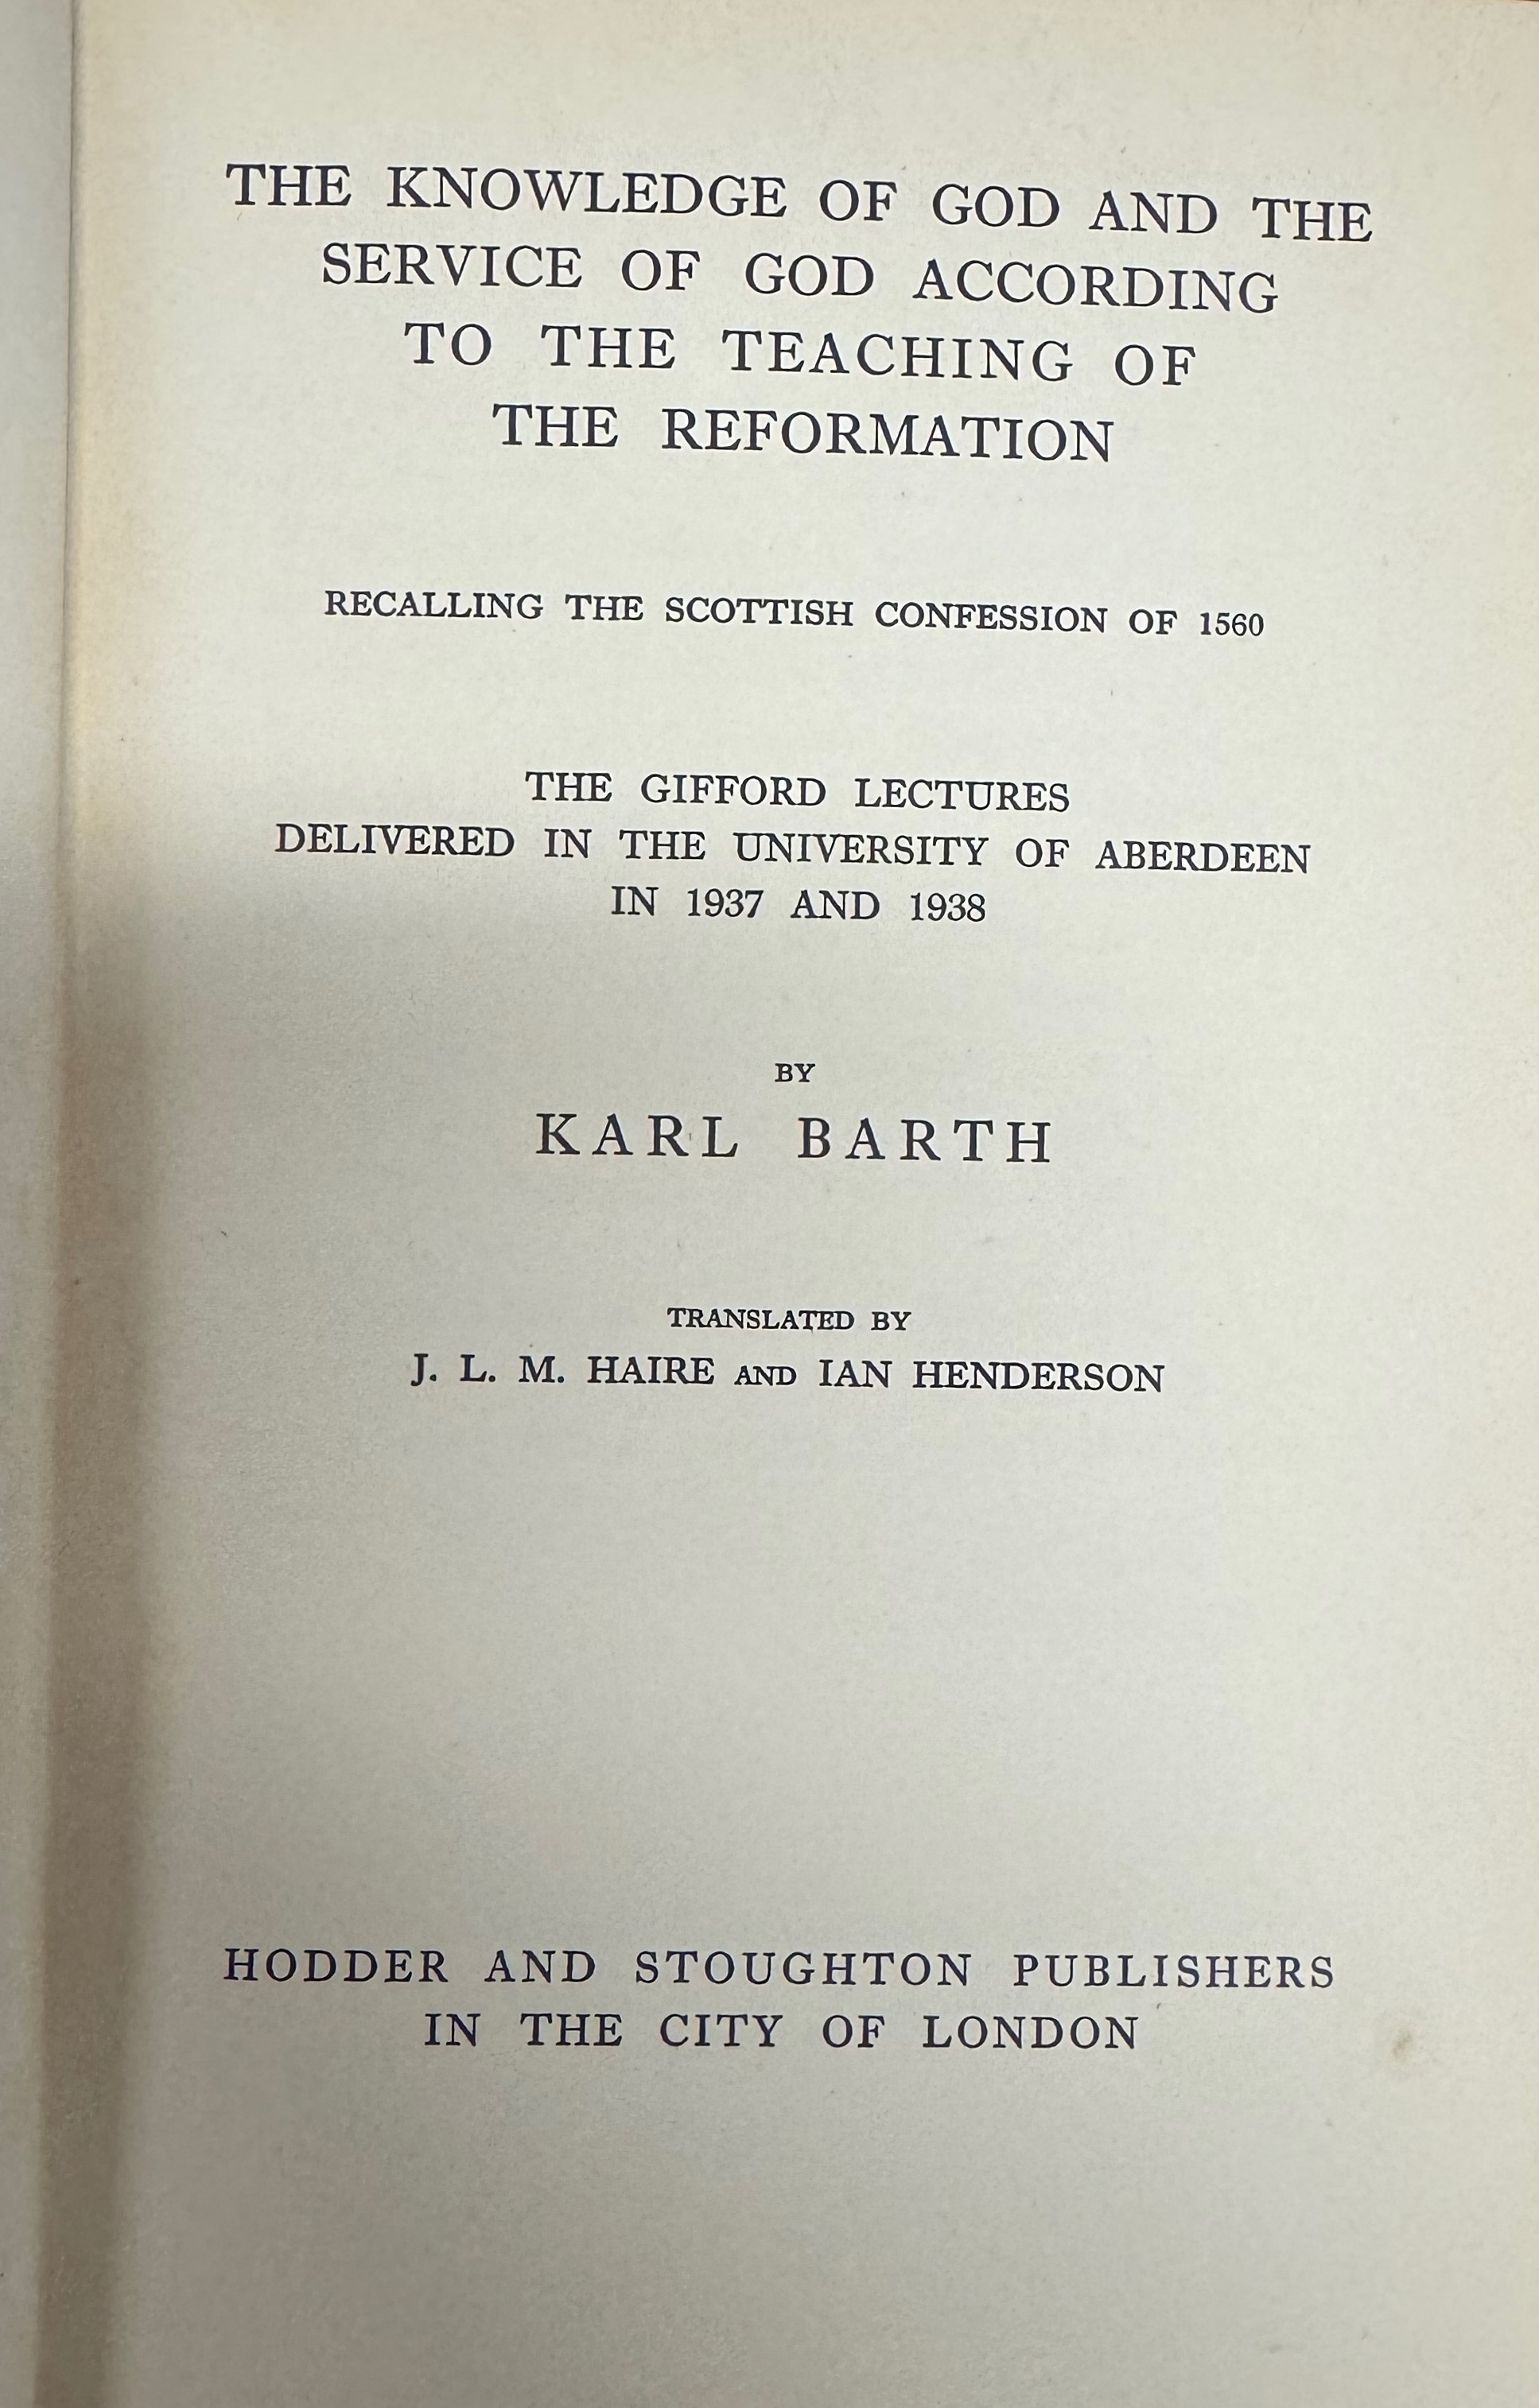 1938-KB-1 title page